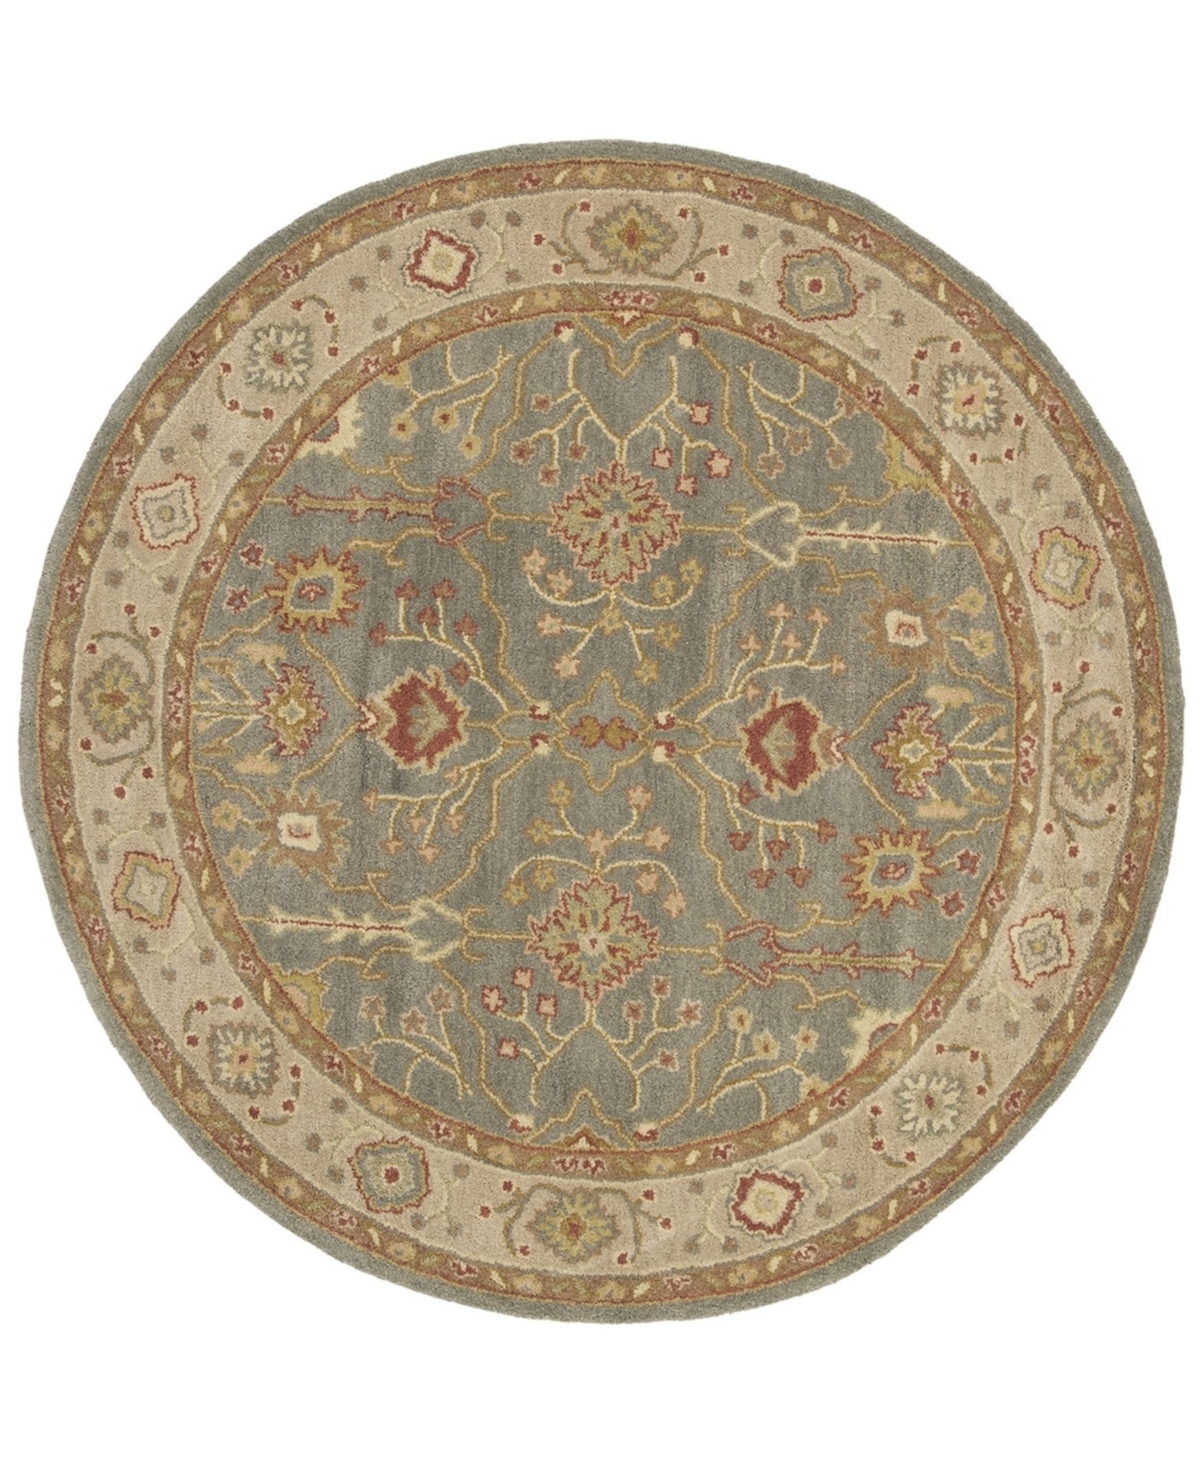 Safavieh Antiquity At314 Blue And Ivory 8' X 8' Round Area Rug